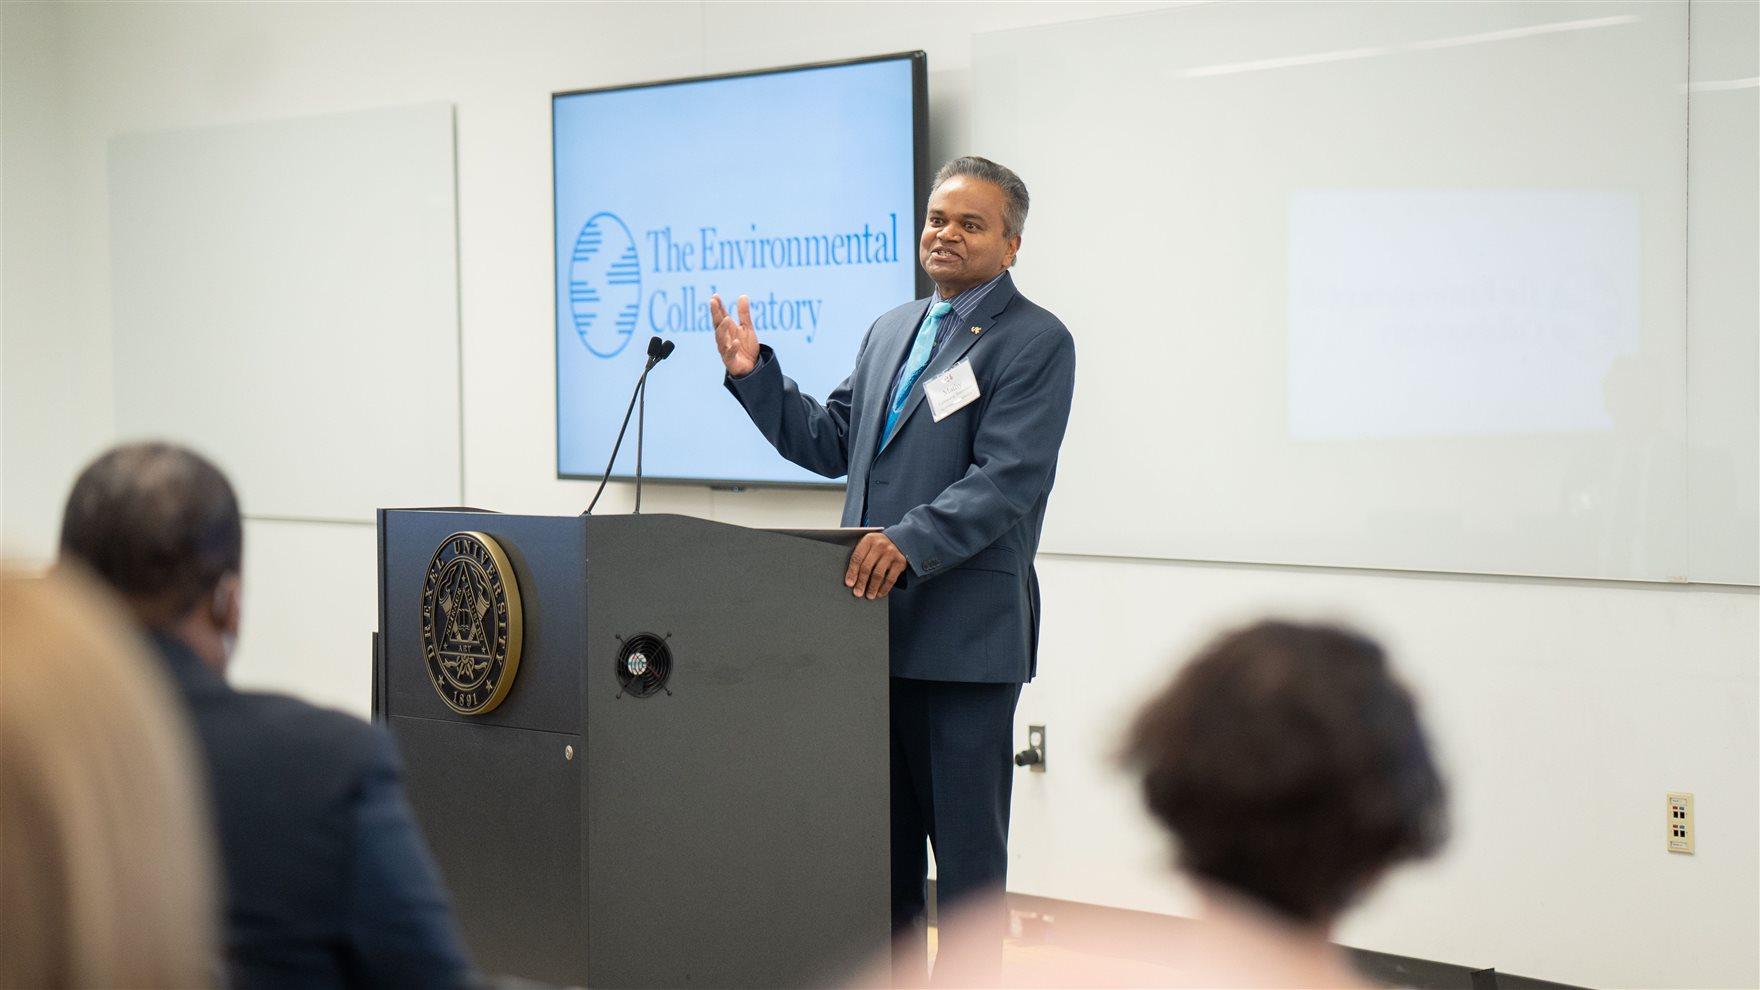 Mathy Vathanaraj Stanislaus speaking from a podium at the opening of The Environmental Collaboratory on Feb. 11, 2022.